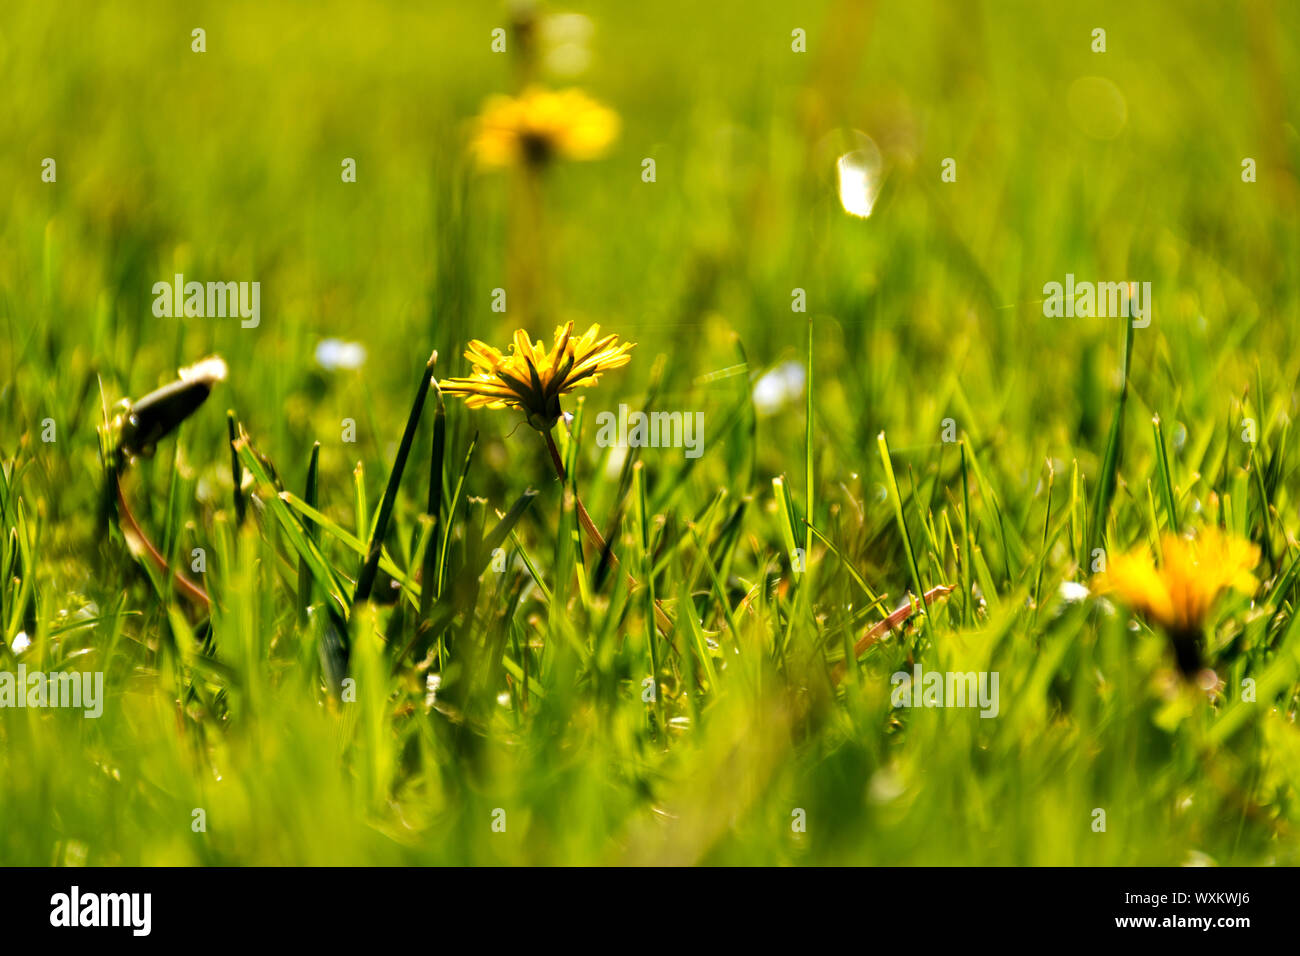 Close-up of dandelions in sunset background in orange and yellow Stock Photo